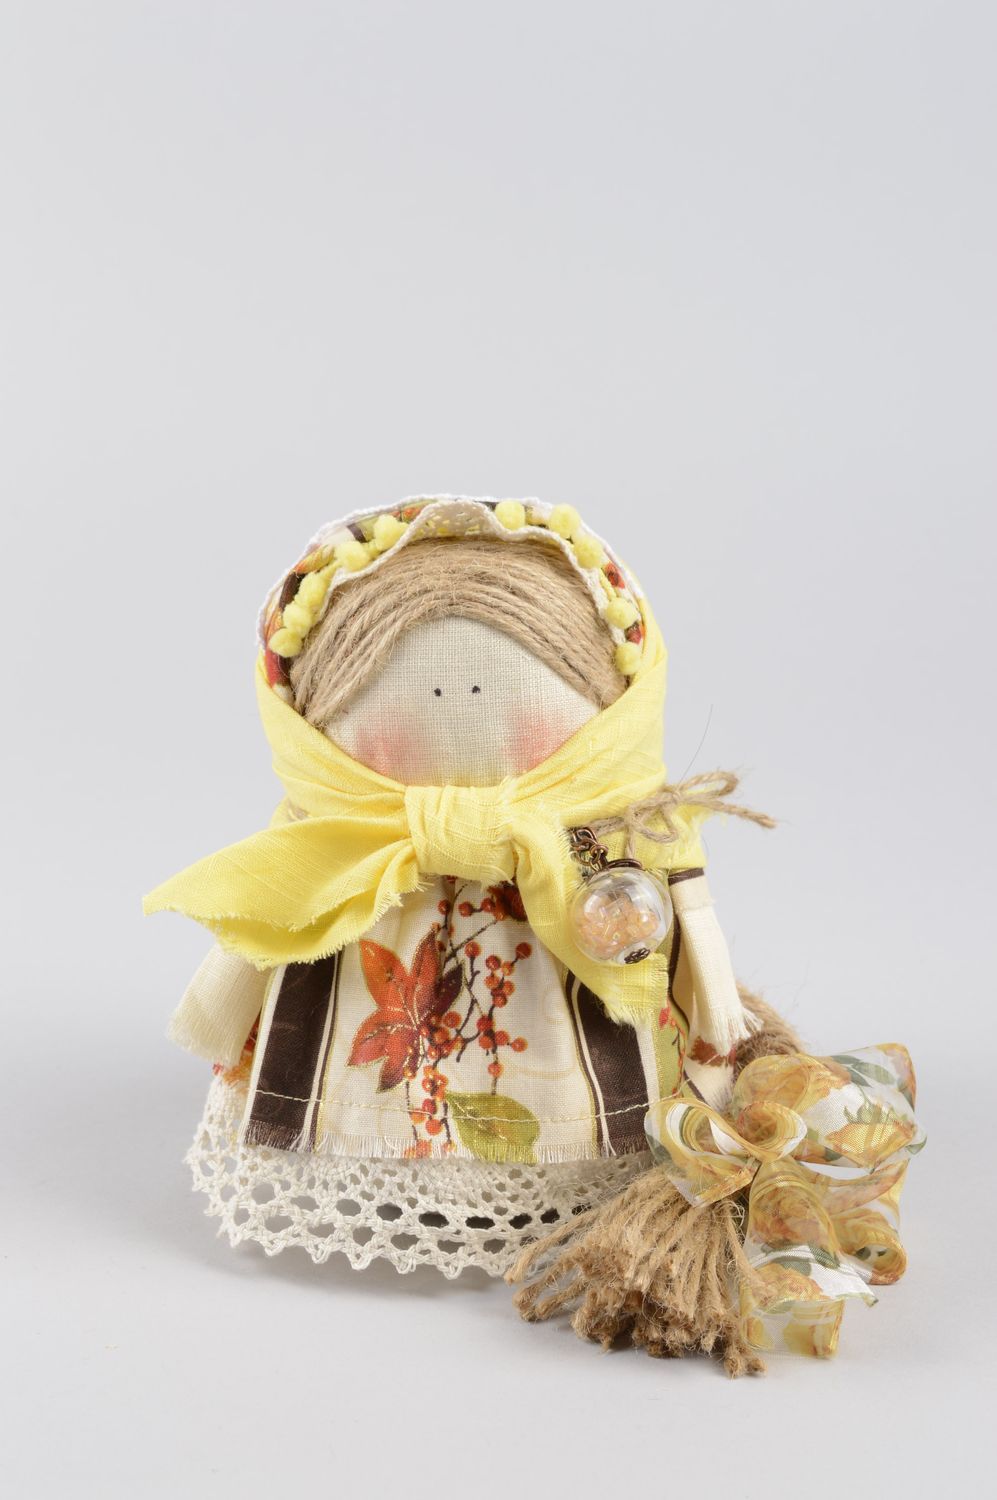 Handmade folk doll decorative use only unusual gift for baby fabric doll photo 1